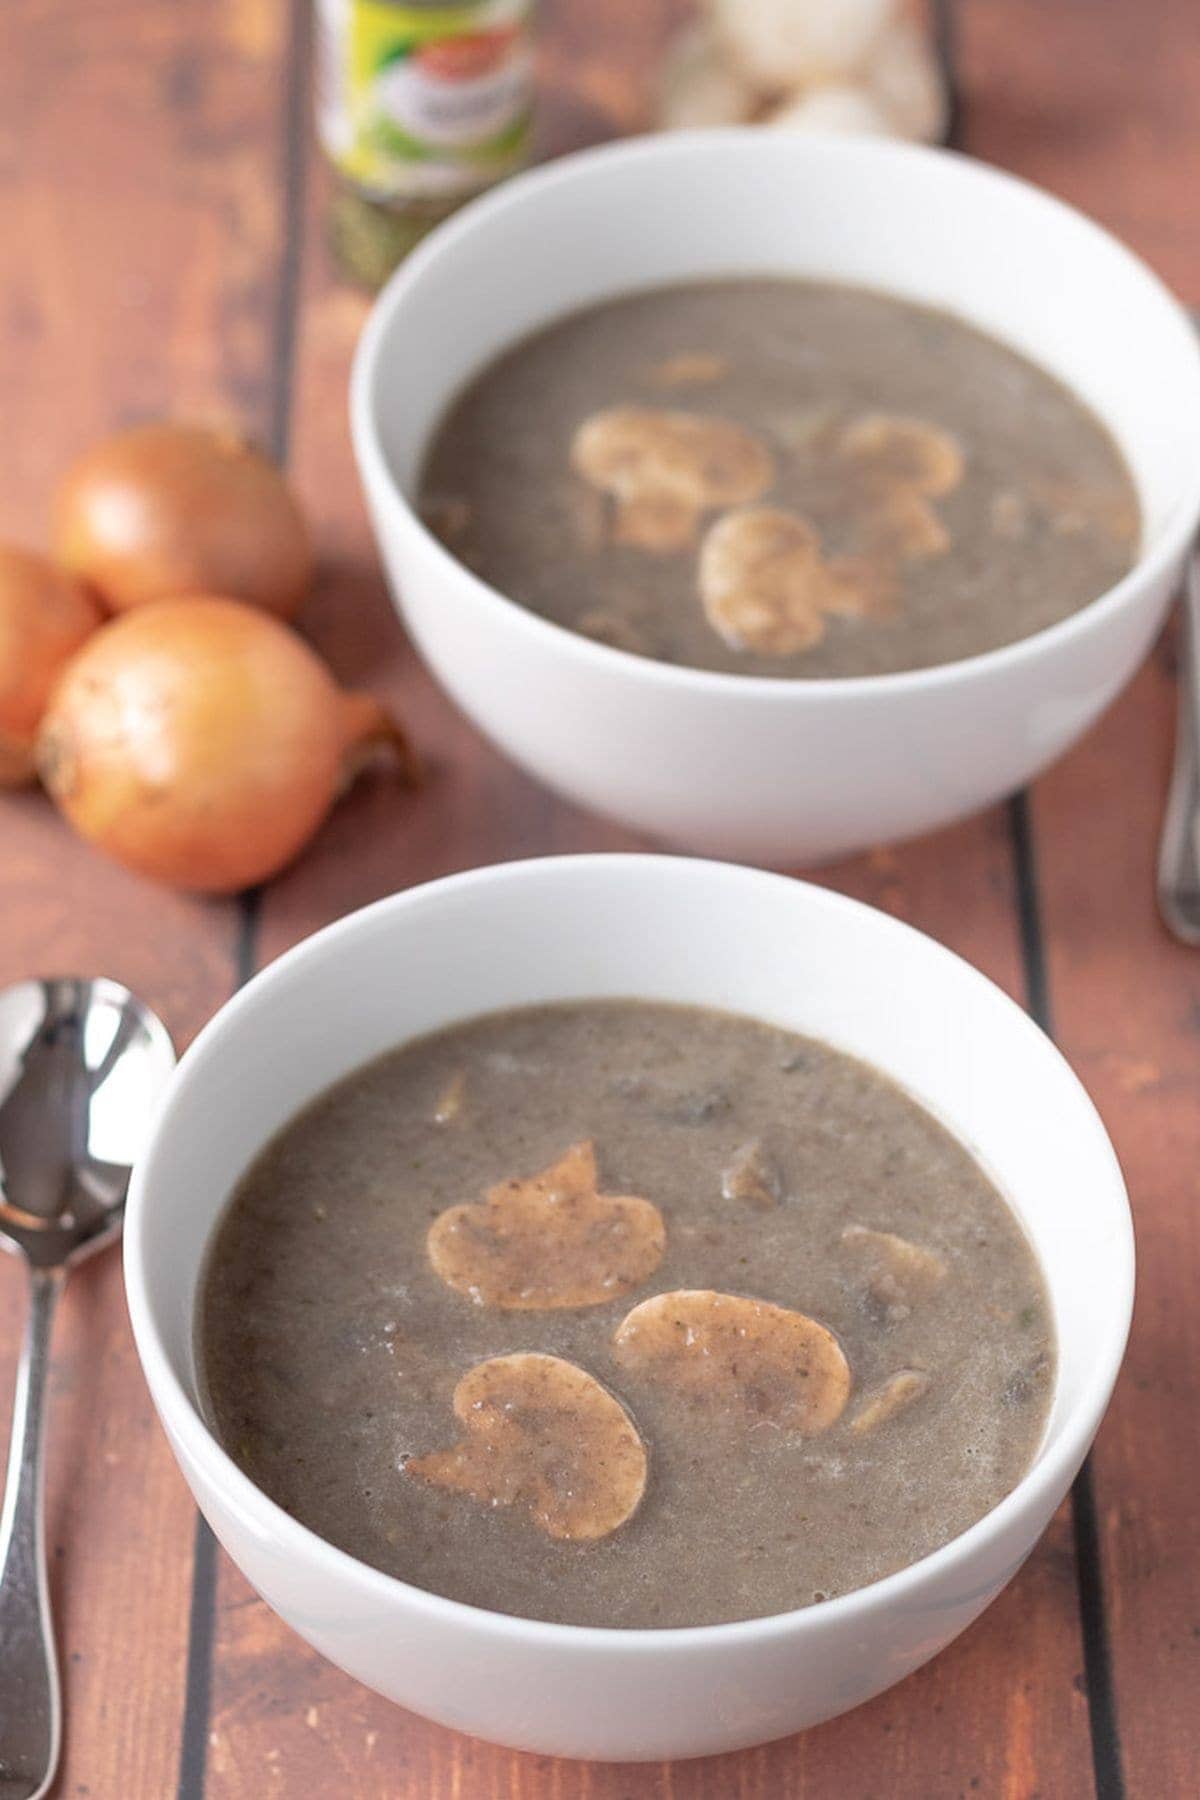 Two bowls of mushroom tarragon soup one in front of the other garnished with sliced mushrooms.